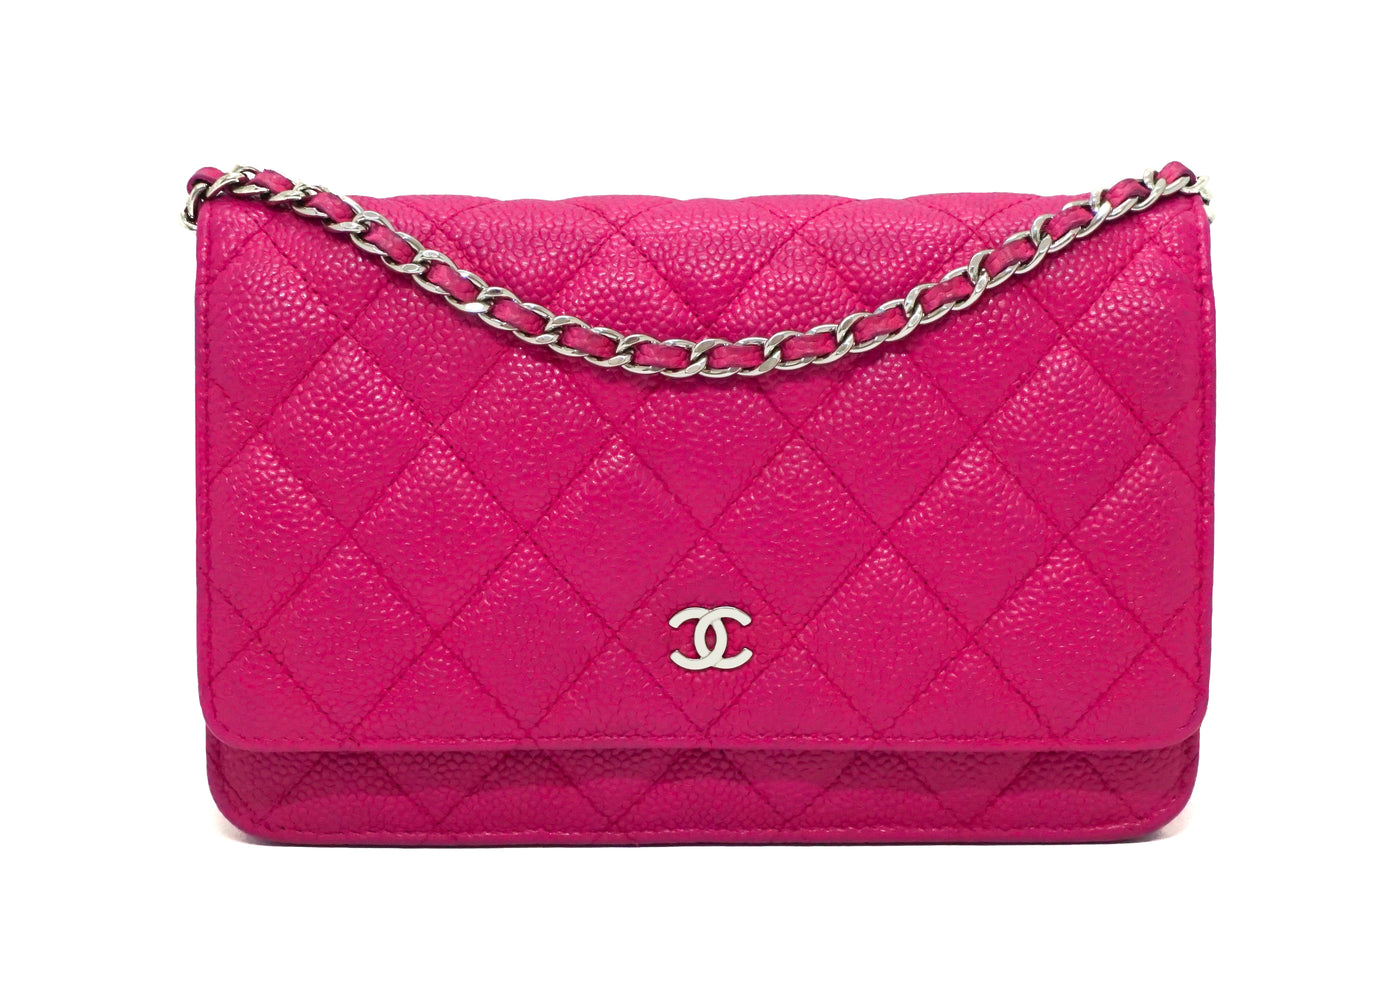 Chanel Rare Hot Pink Caviar Wallet on Chain (WOC)